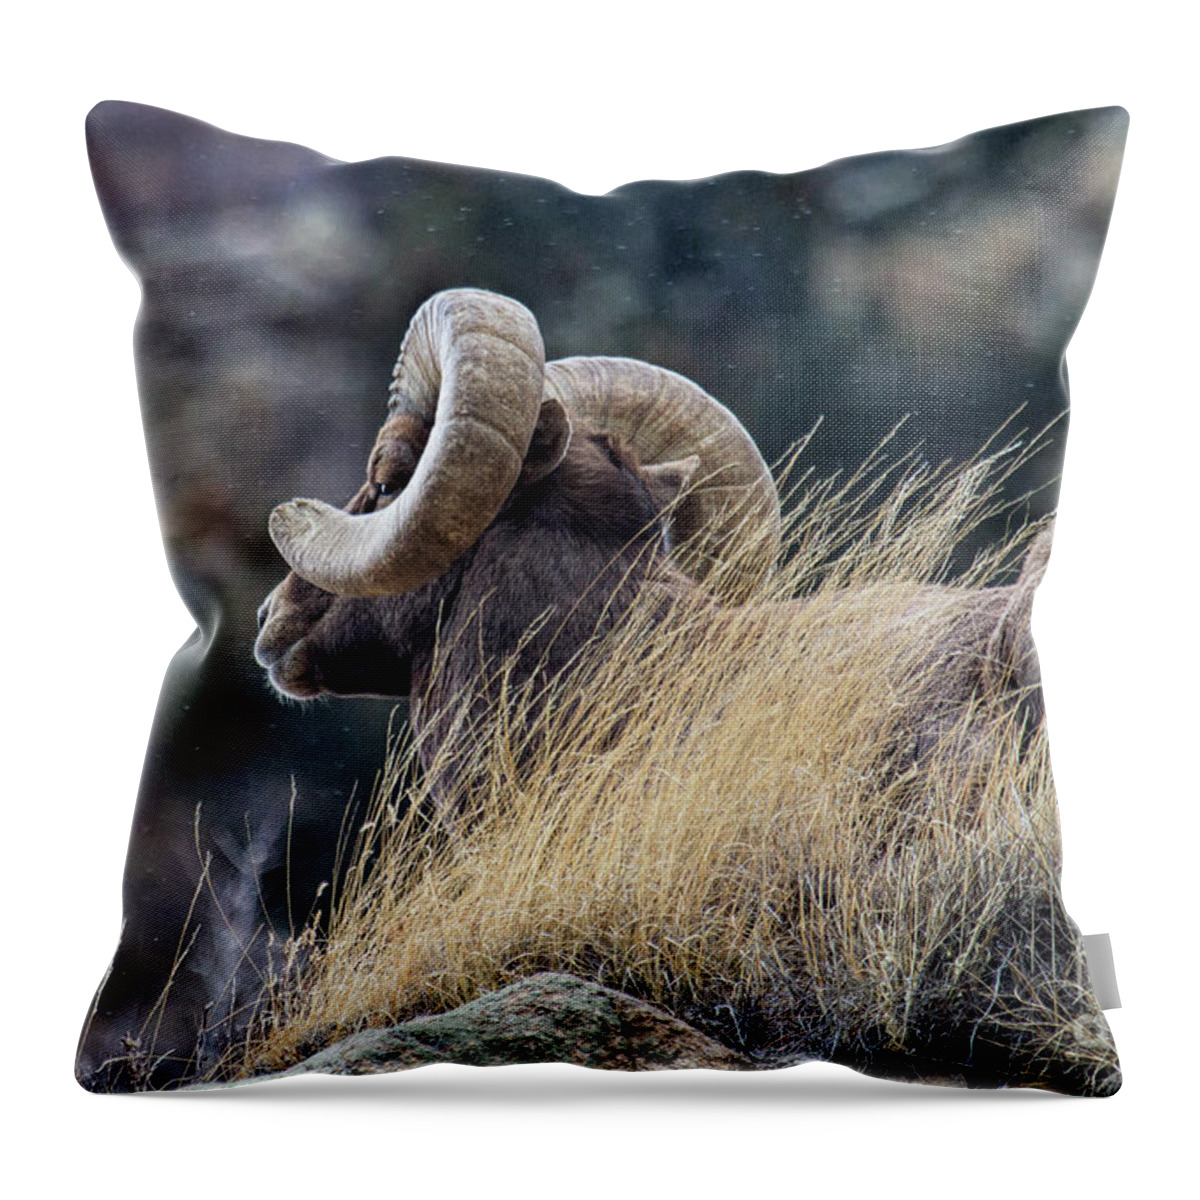 In Focus Throw Pillow featuring the photograph The Watchman by Jim Garrison